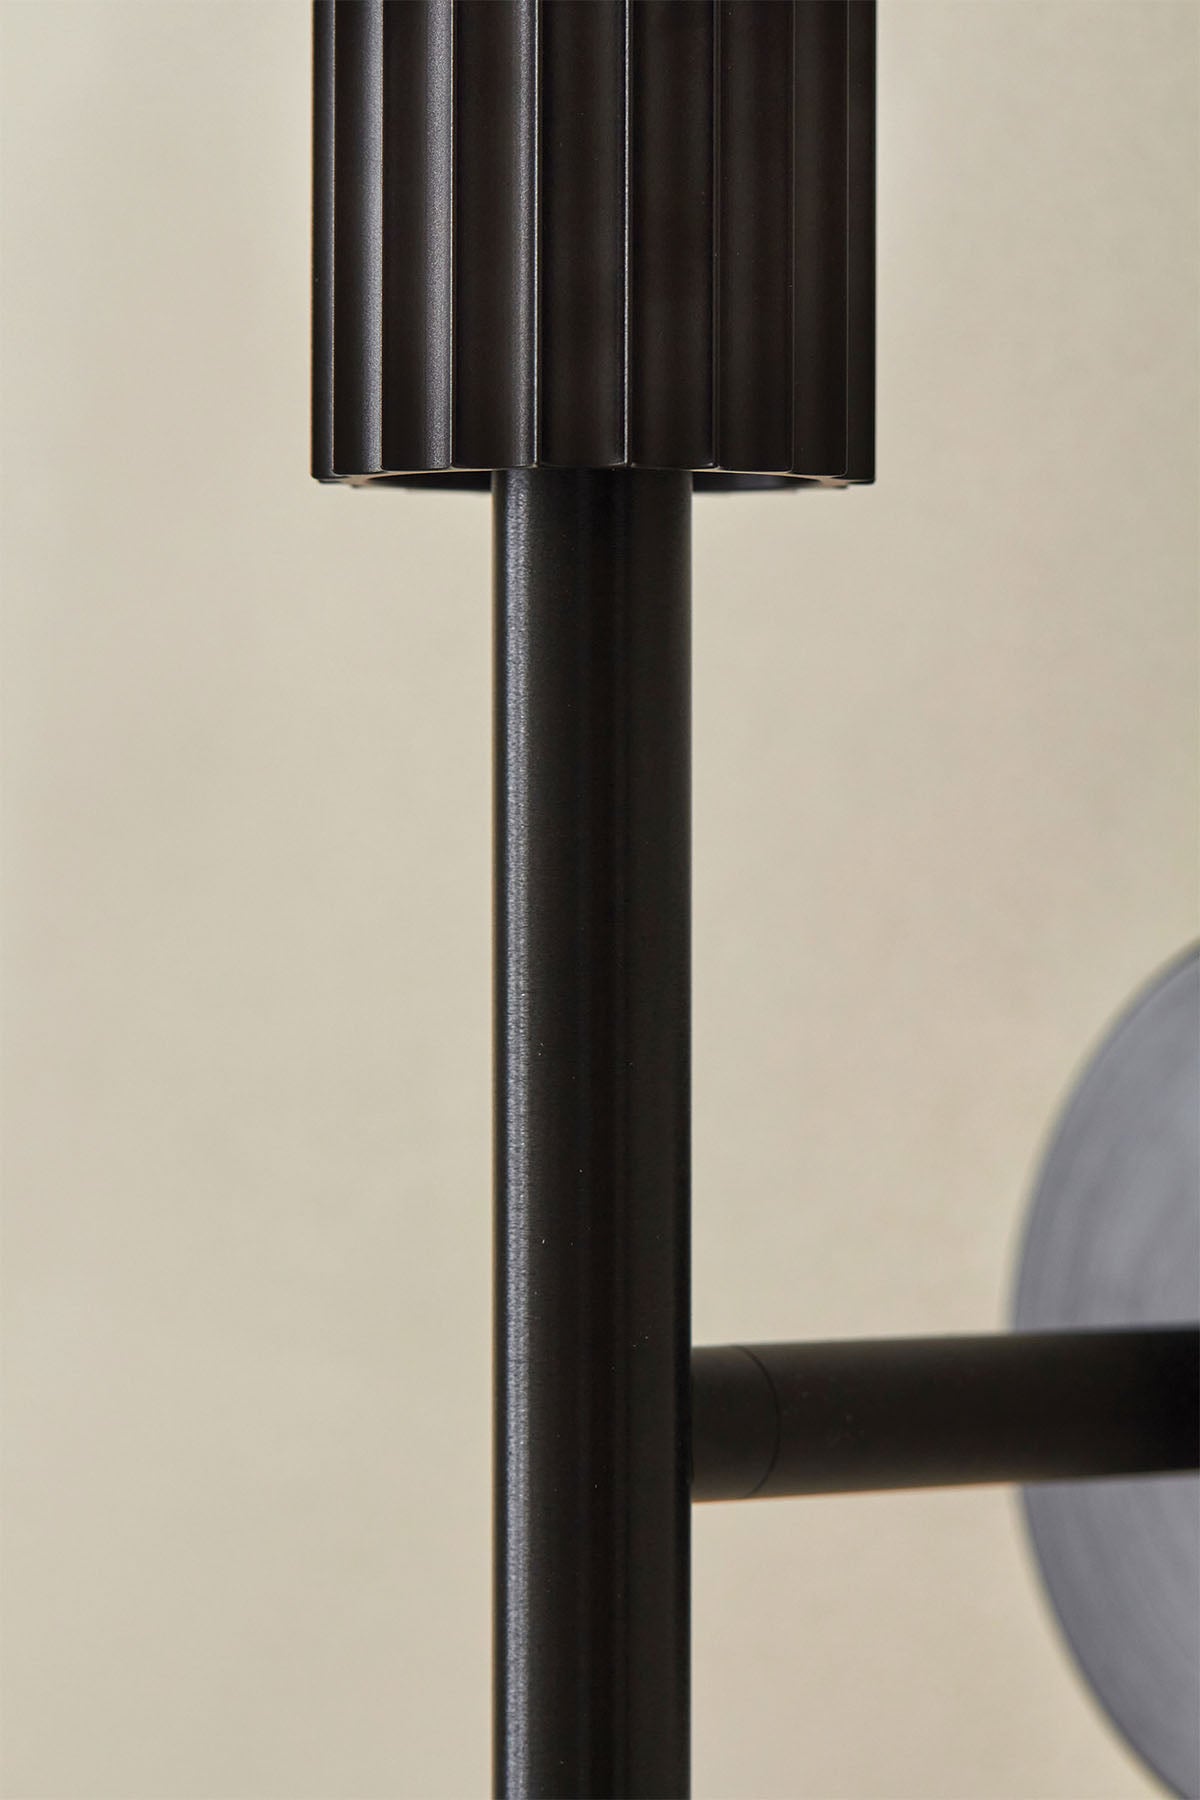 Attalos Wall Light in Brushed Black, detail. Image by Lawrence Furzey